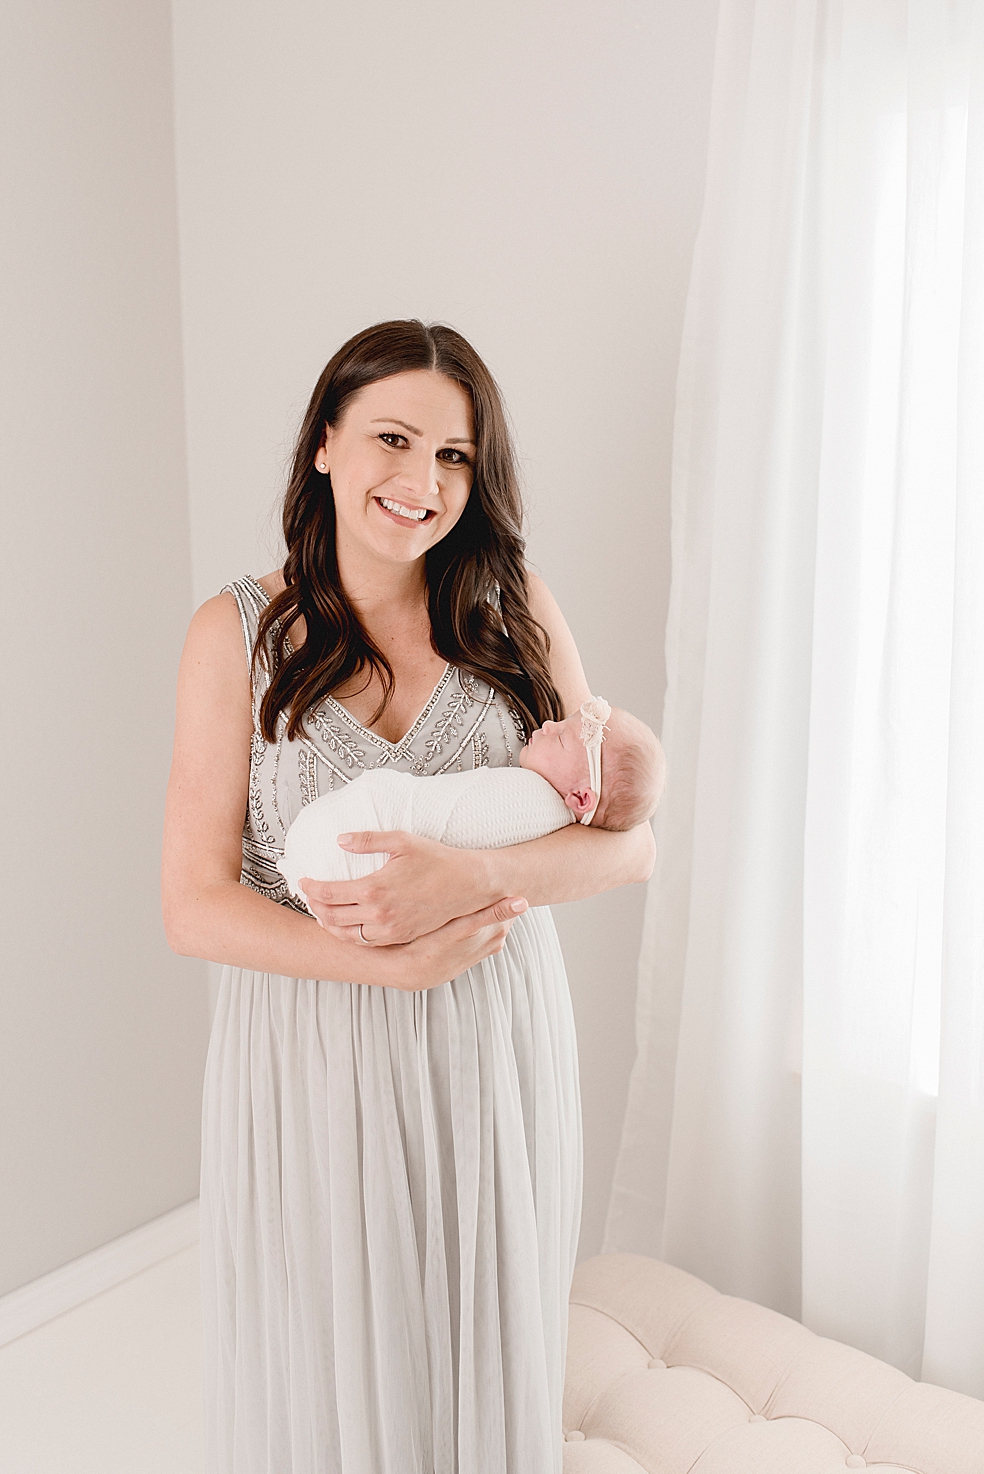 New mom in beaded gray dress smiling | Photo by Decatur Alabama Newborn Photographer Jessica Lee 